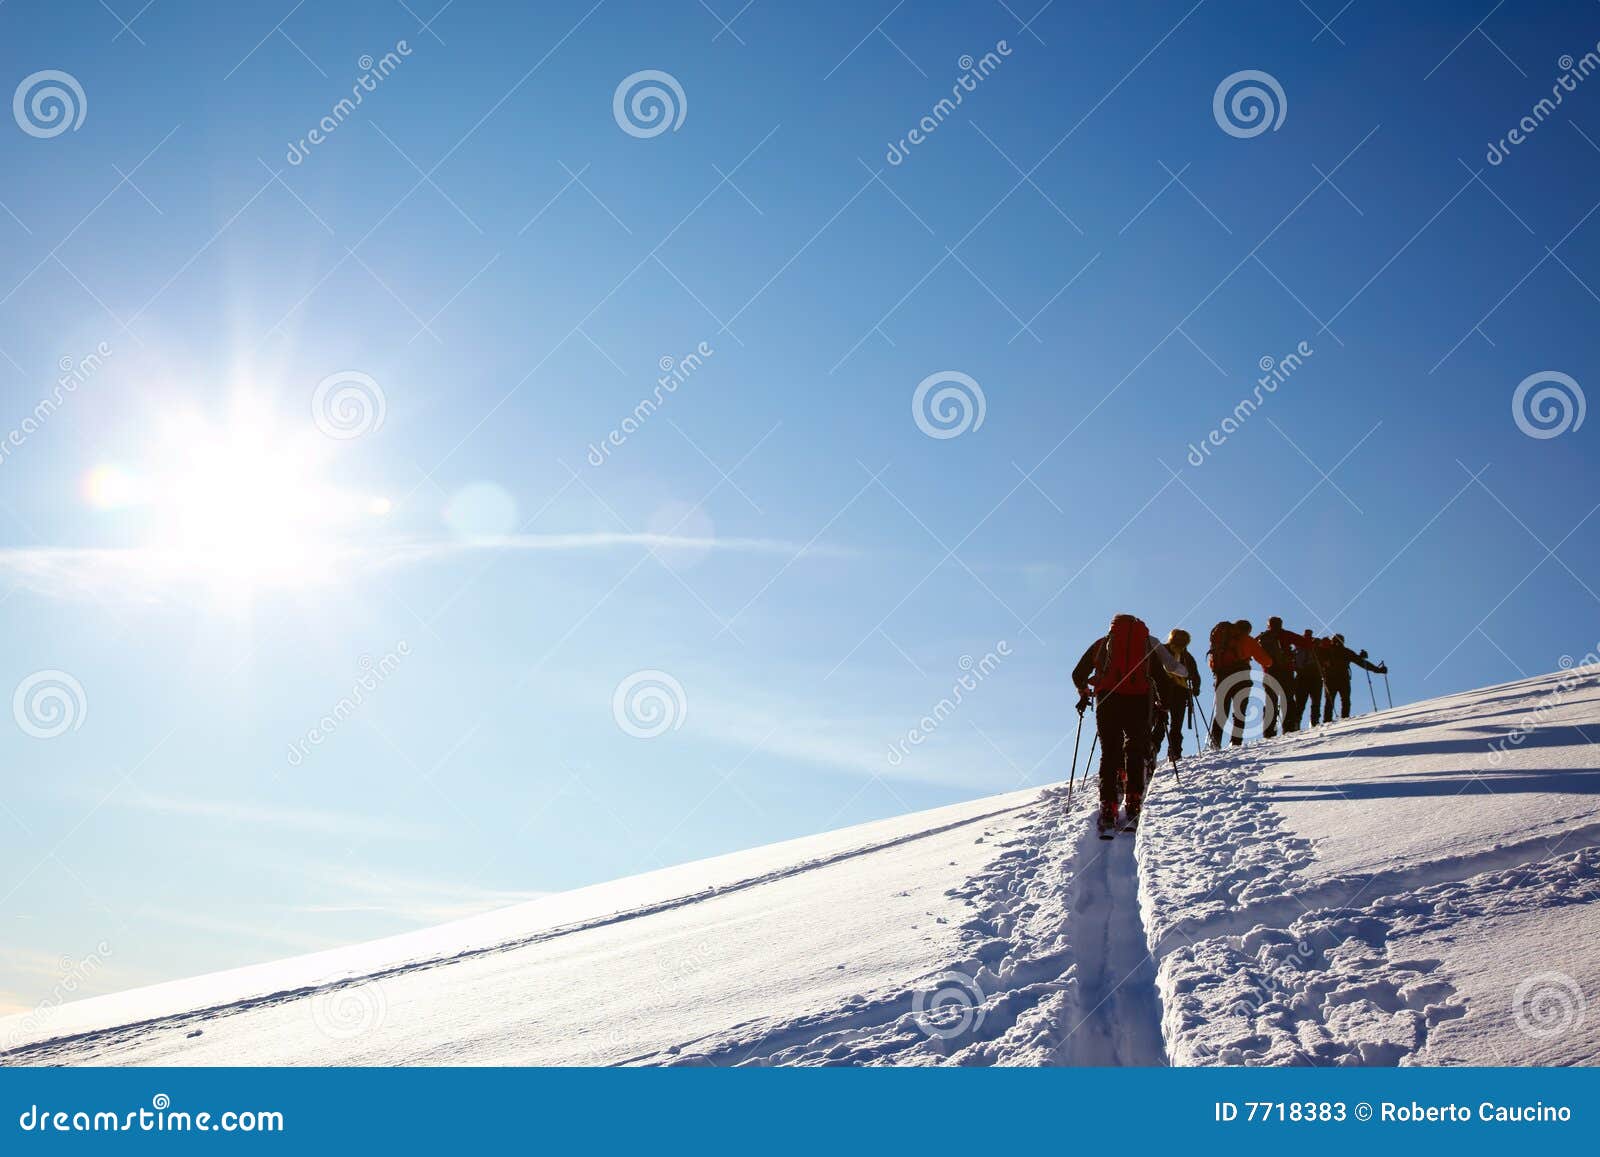 backcountry skiers